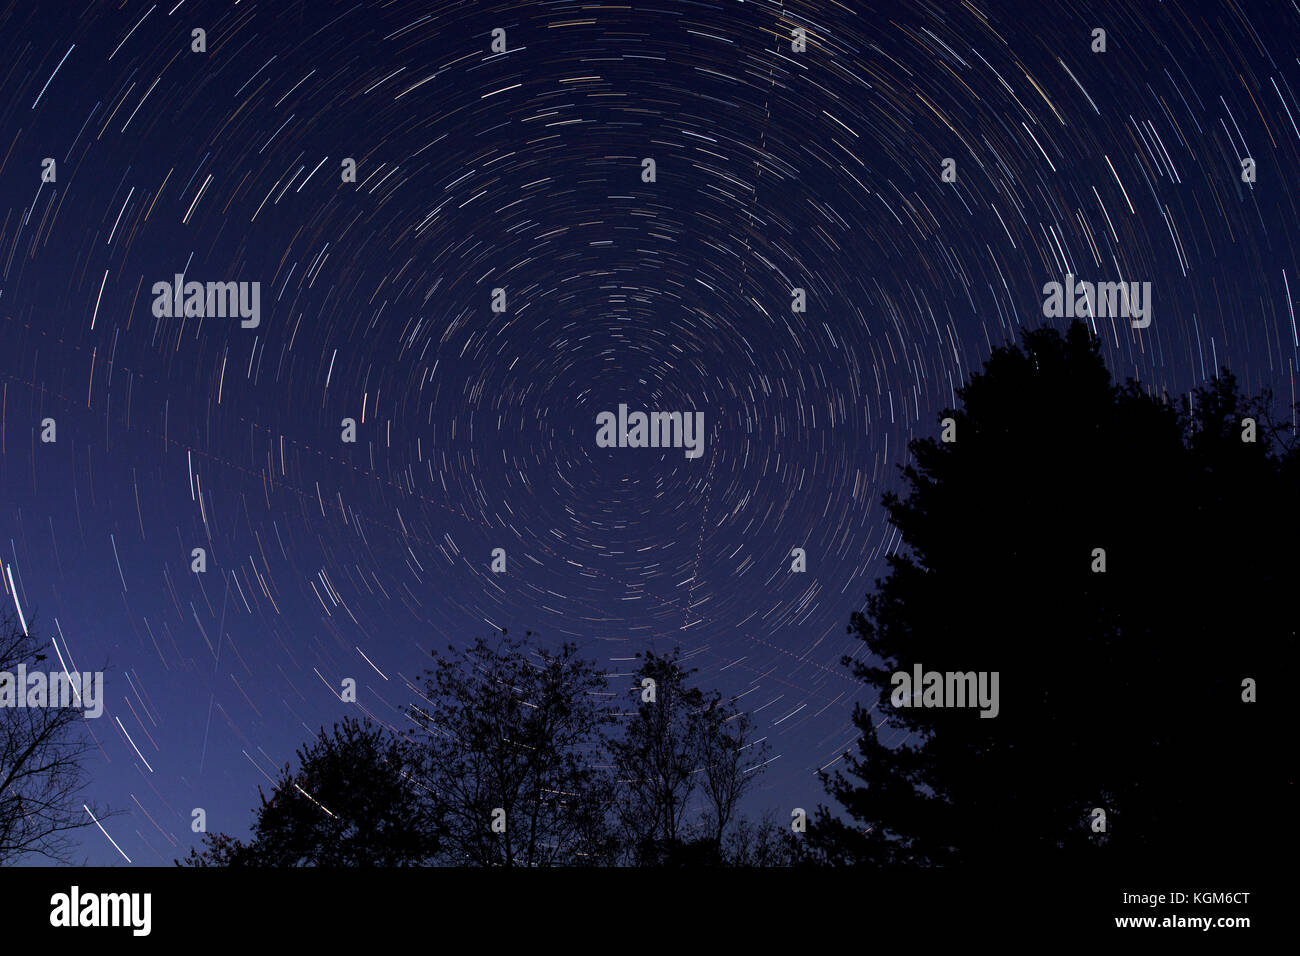 Nighttime time lapse photo centered on North star (Polaris) showing star trails and aircraft tracks. Stock Photo